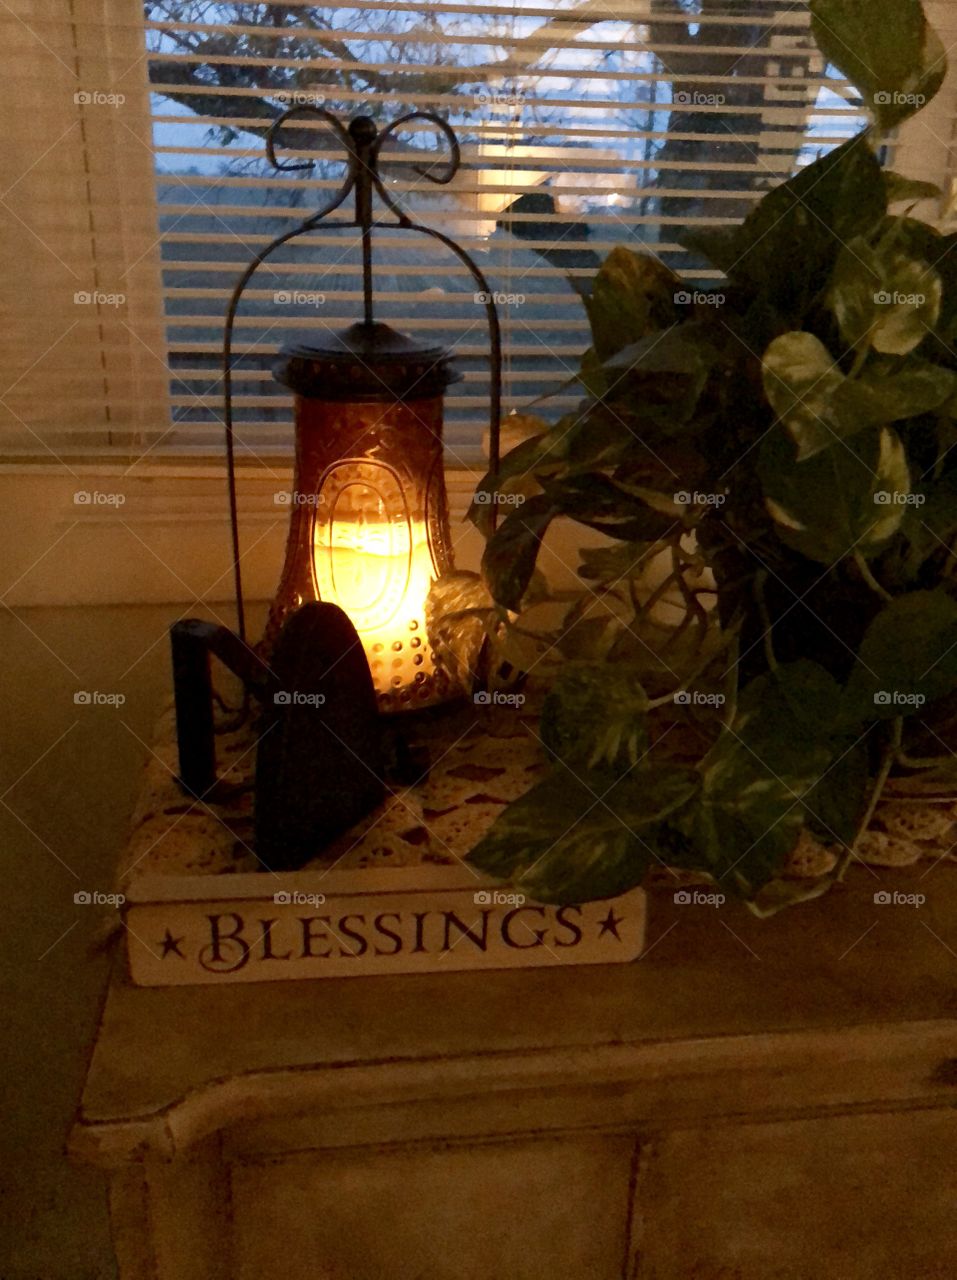 Decorative home grouping blessings sign candle plant table antiques 